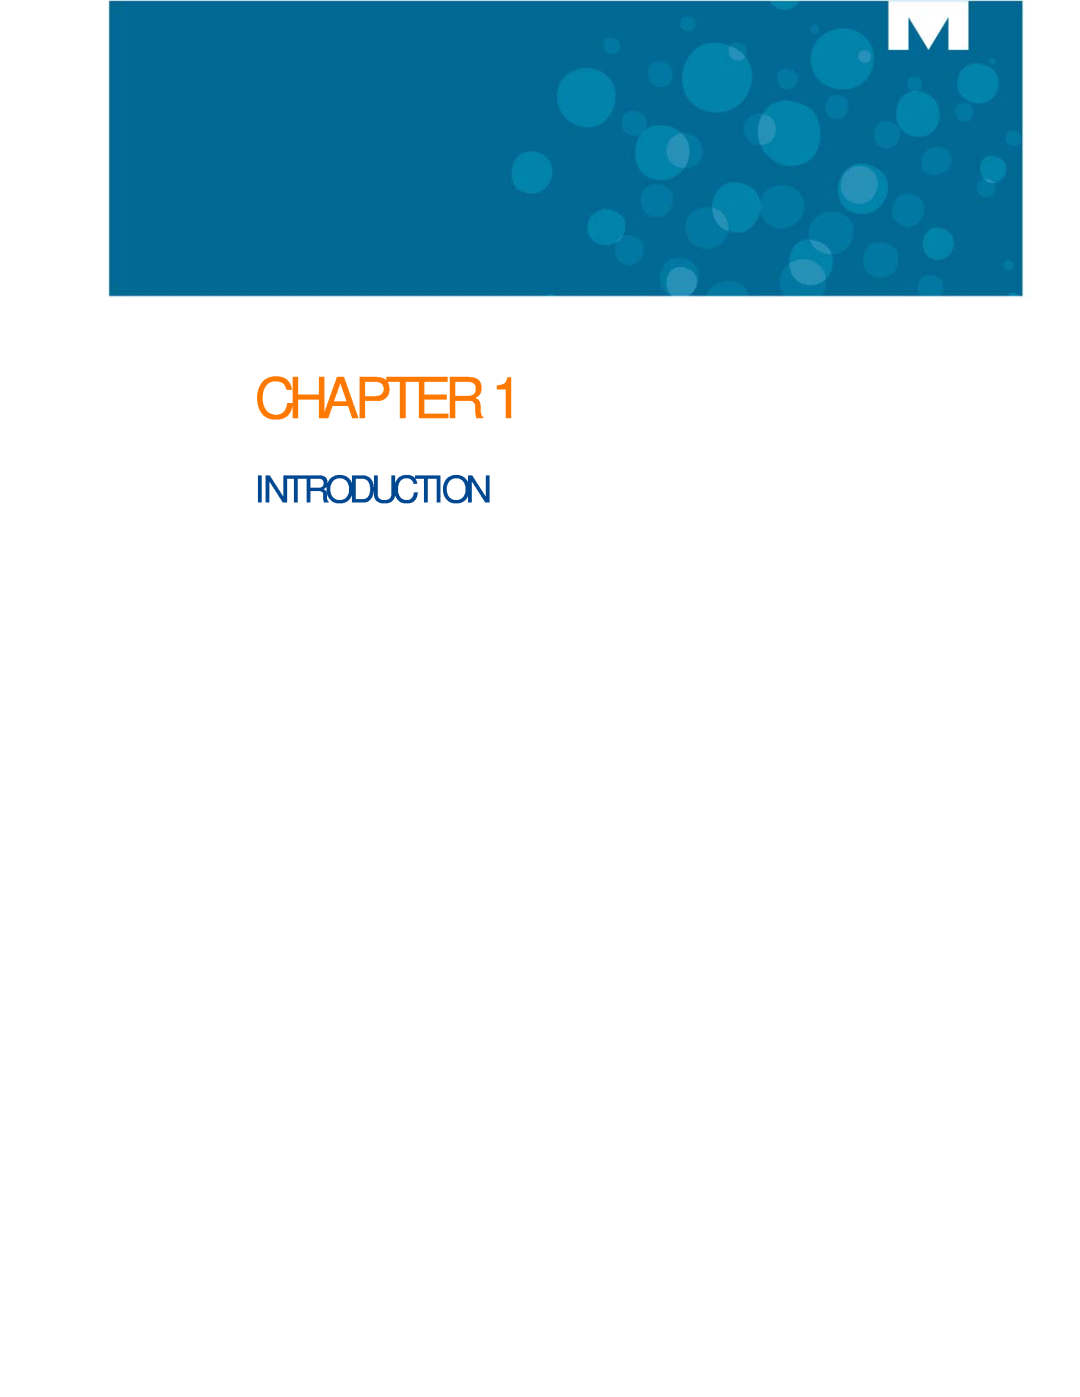 Mitel UC360 manual Chapter, Introduction 